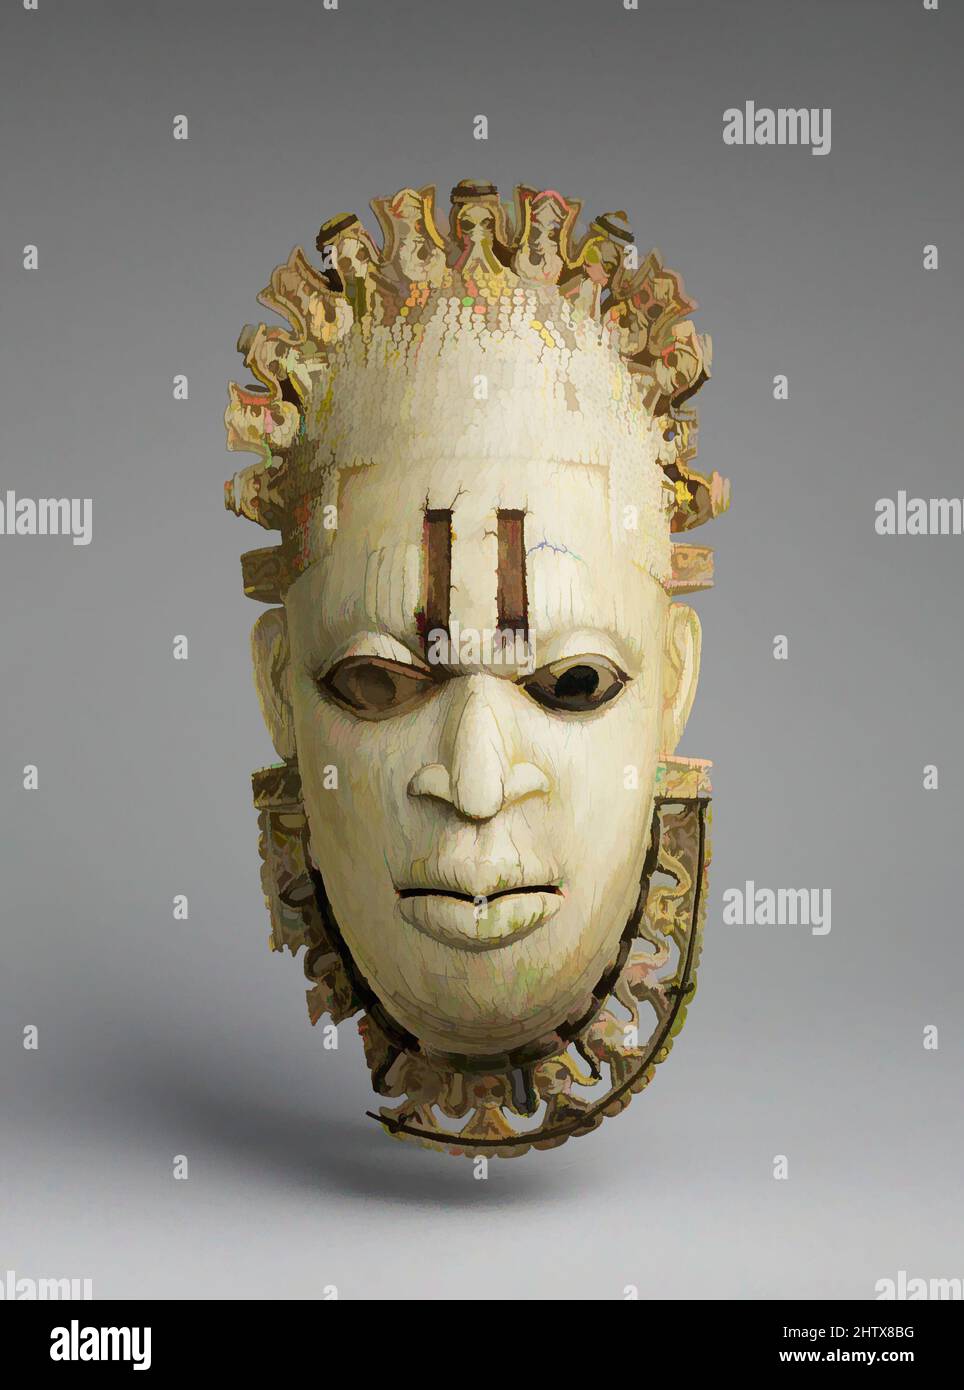 Art inspired by Queen Mother Pendant Mask: Iyoba, 16th century, Nigeria, Court of Benin, Edo peoples, Ivory, iron, copper (?), H. 9 3/8 x W. 5 x D. 3 1/4 in. (23.8 x 12.7 x 8.3 cm), Bone/Ivory-Sculpture, This ivory pendant mask is one of a pair of nearly identical works. Although, Classic works modernized by Artotop with a splash of modernity. Shapes, color and value, eye-catching visual impact on art. Emotions through freedom of artworks in a contemporary way. A timeless message pursuing a wildly creative new direction. Artists turning to the digital medium and creating the Artotop NFT Stock Photo